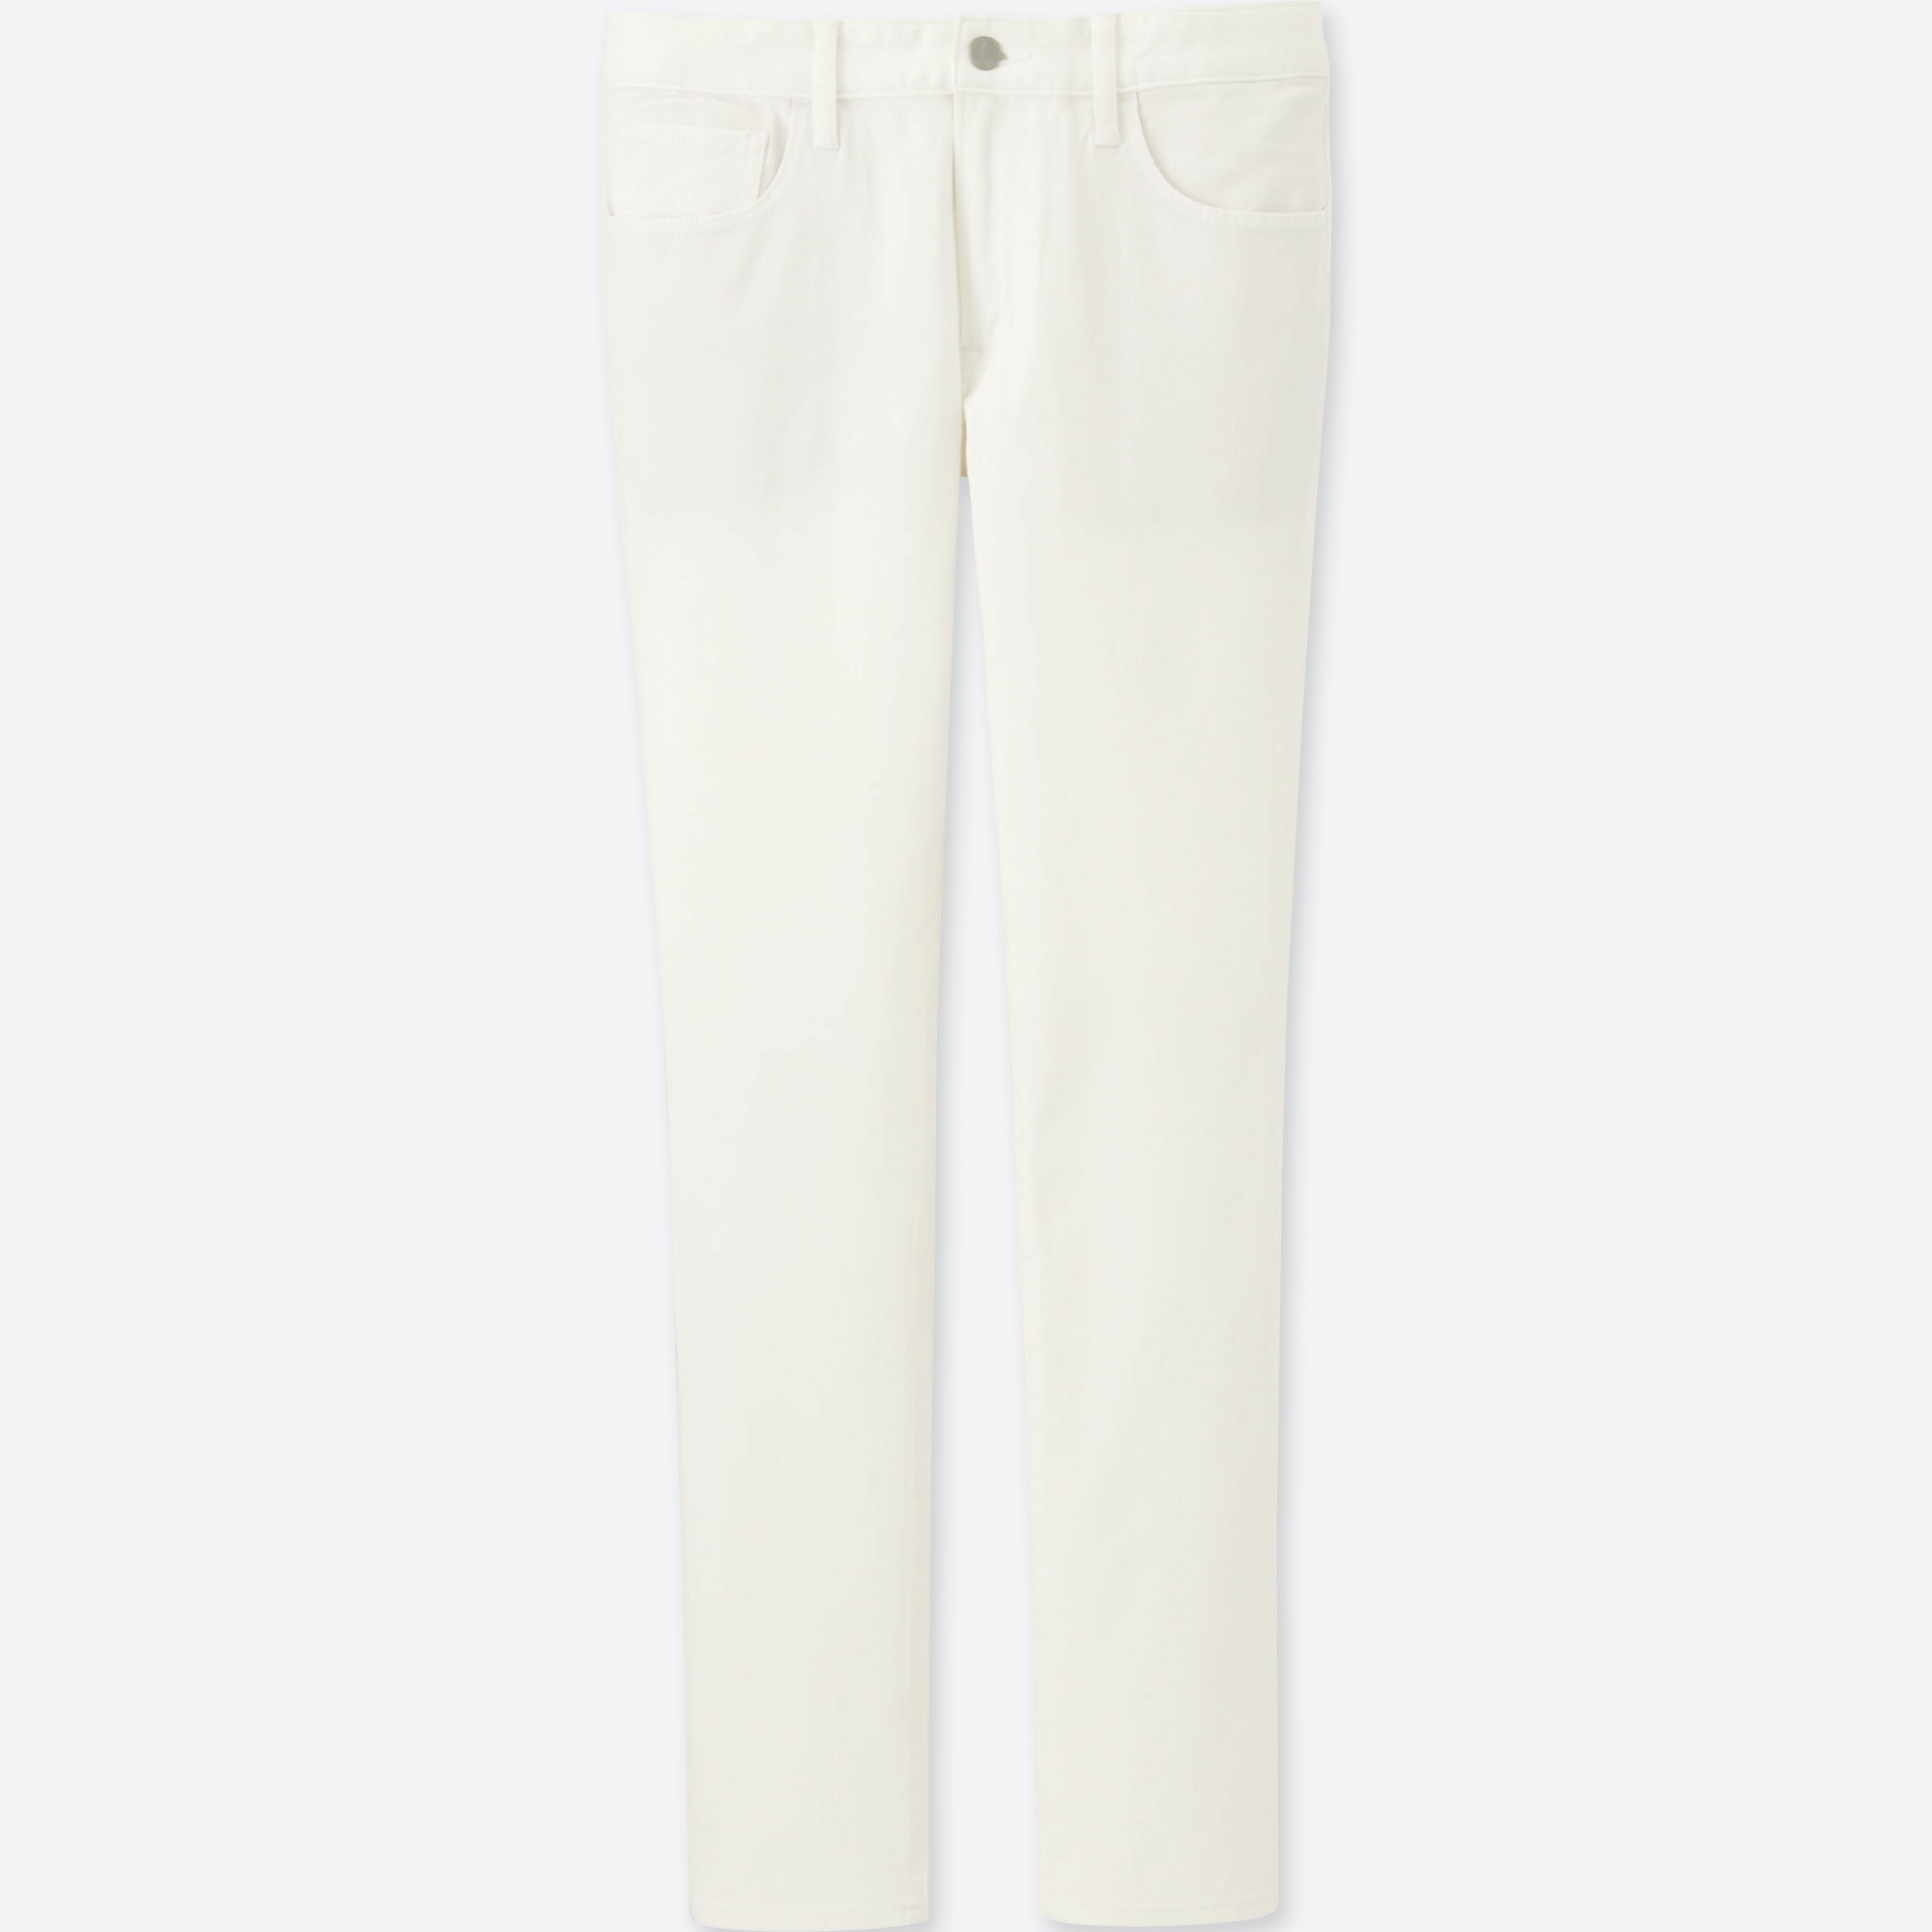 uniqlo skinny tapered jeans